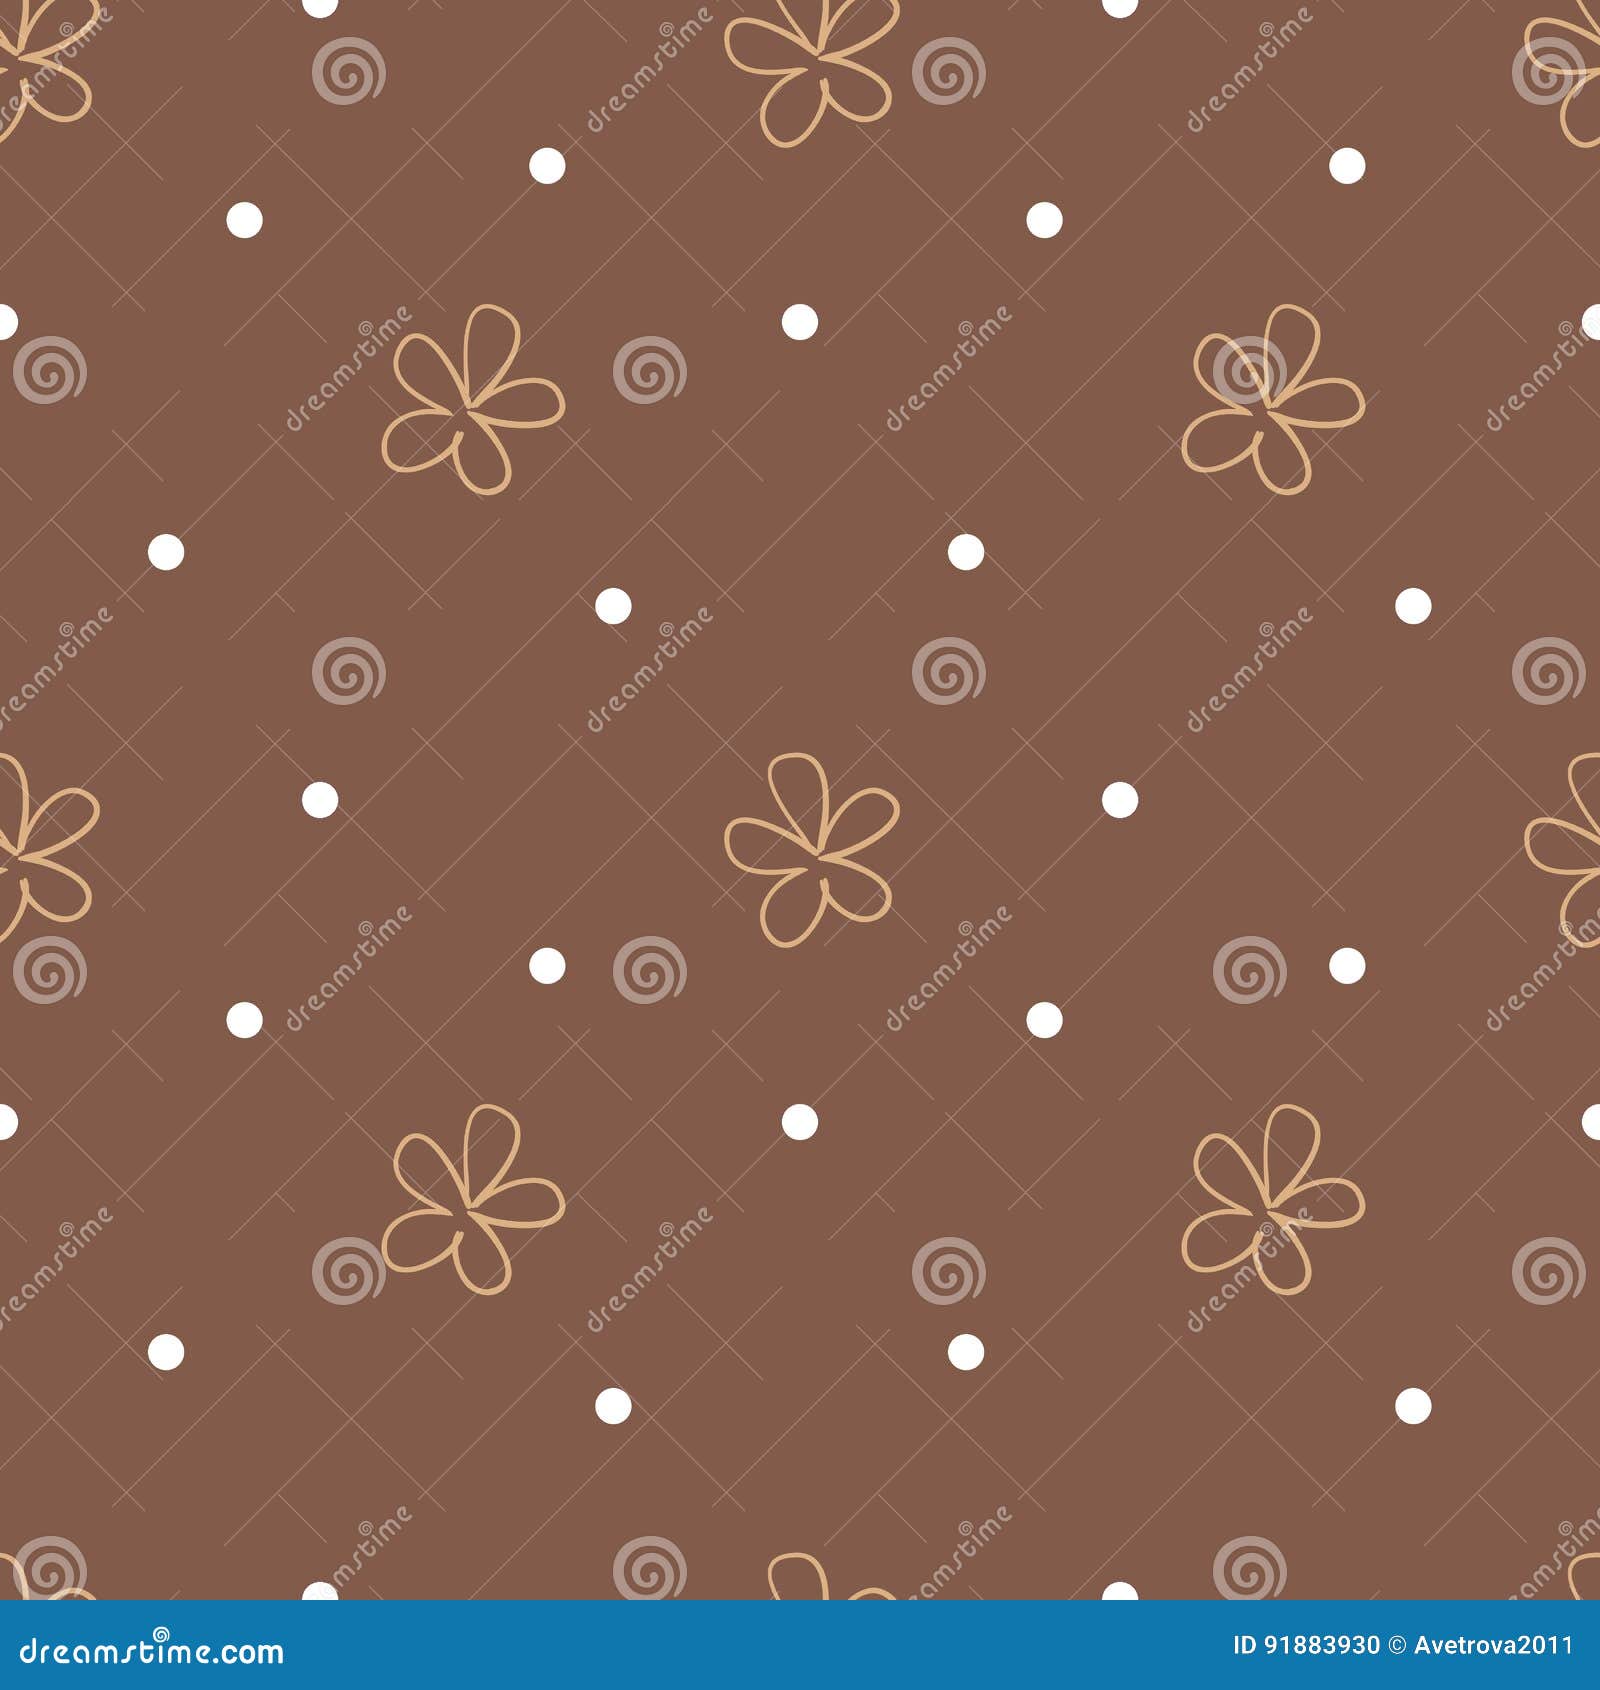 Brown Seamless Background with Beige Flowers and White Dots. Cute Floral  Pattern. Vector Stock Vector - Illustration of simple, ornament: 91883930